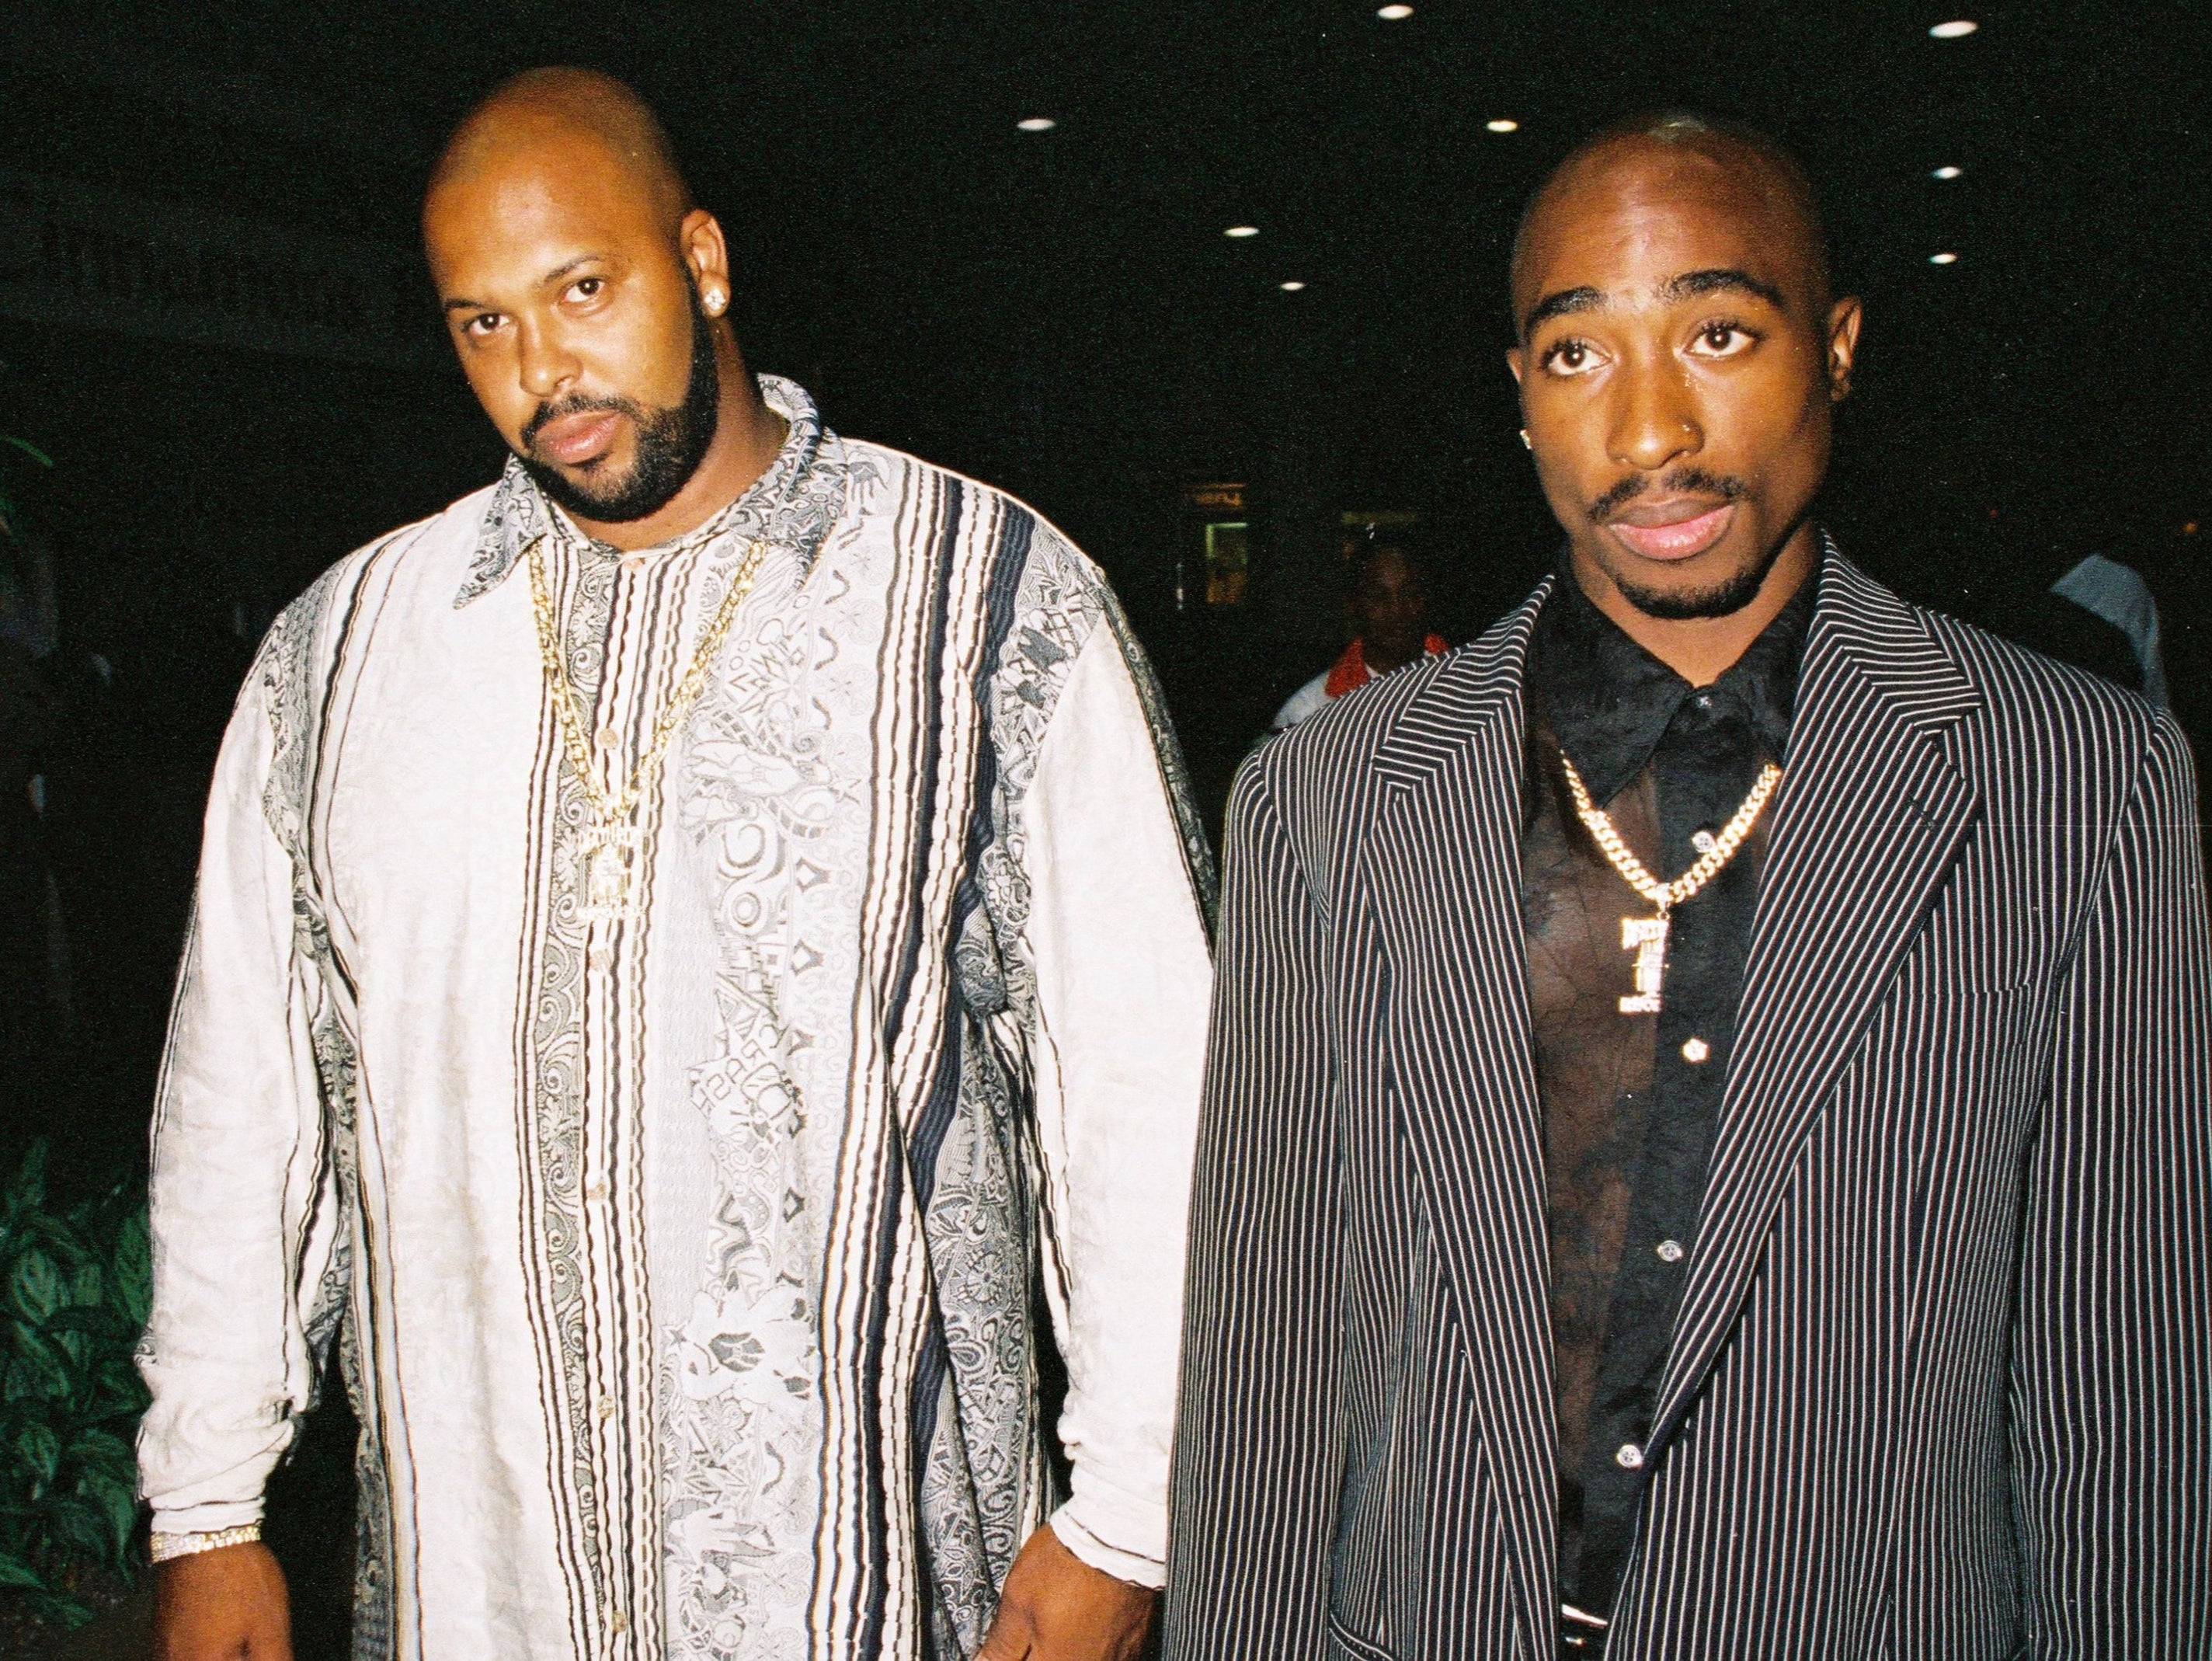 Suge Knight and Tupac Shakur in April 1996